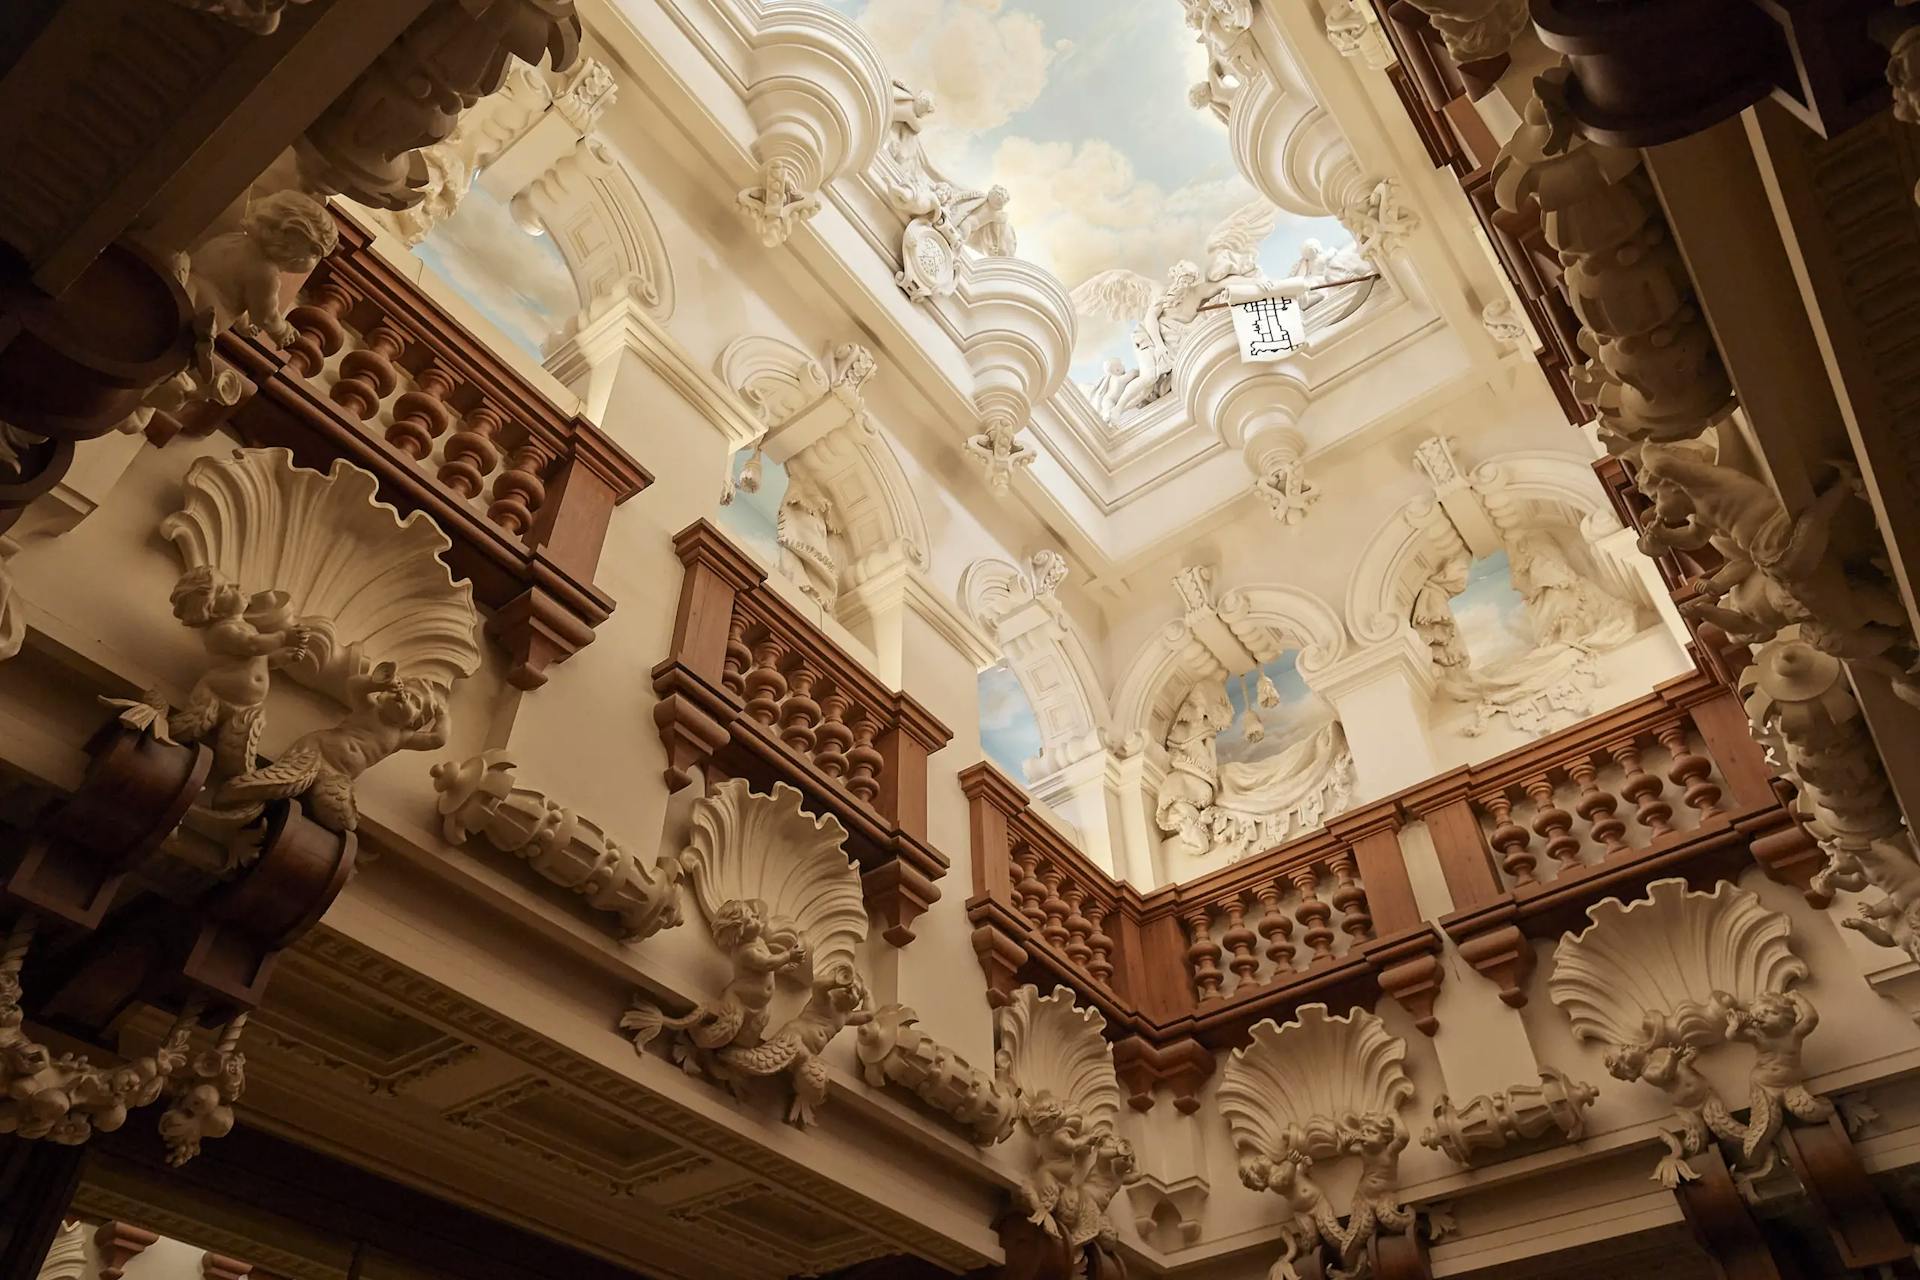 The ceiling of the Cedar Staircase as Harlaxton Manor.